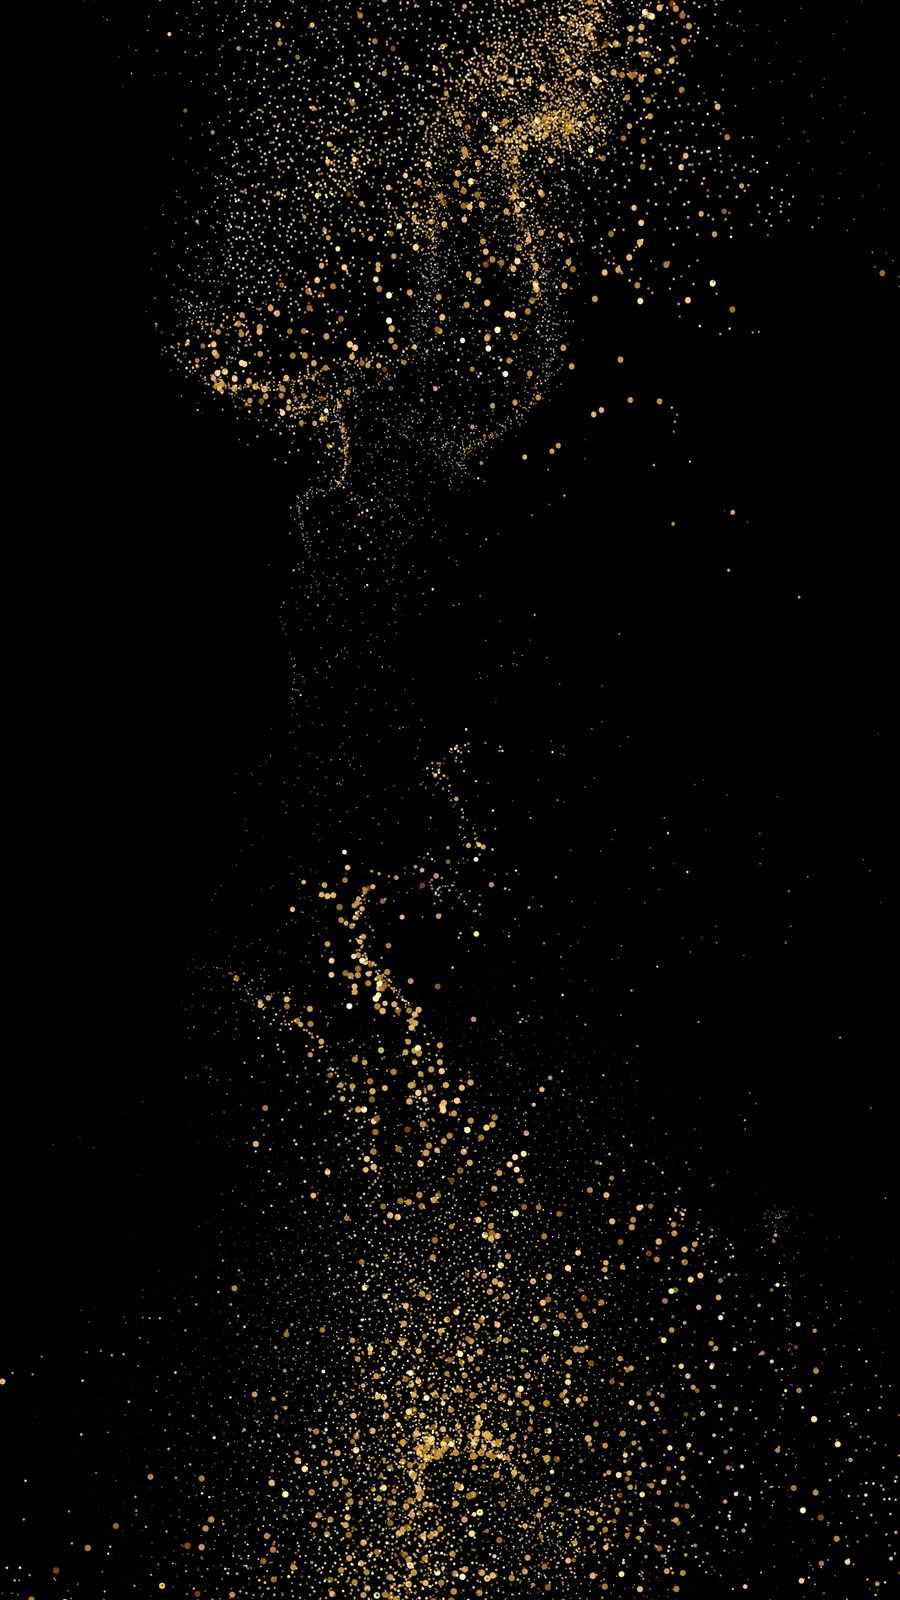 Gold dust on a black background - Gold